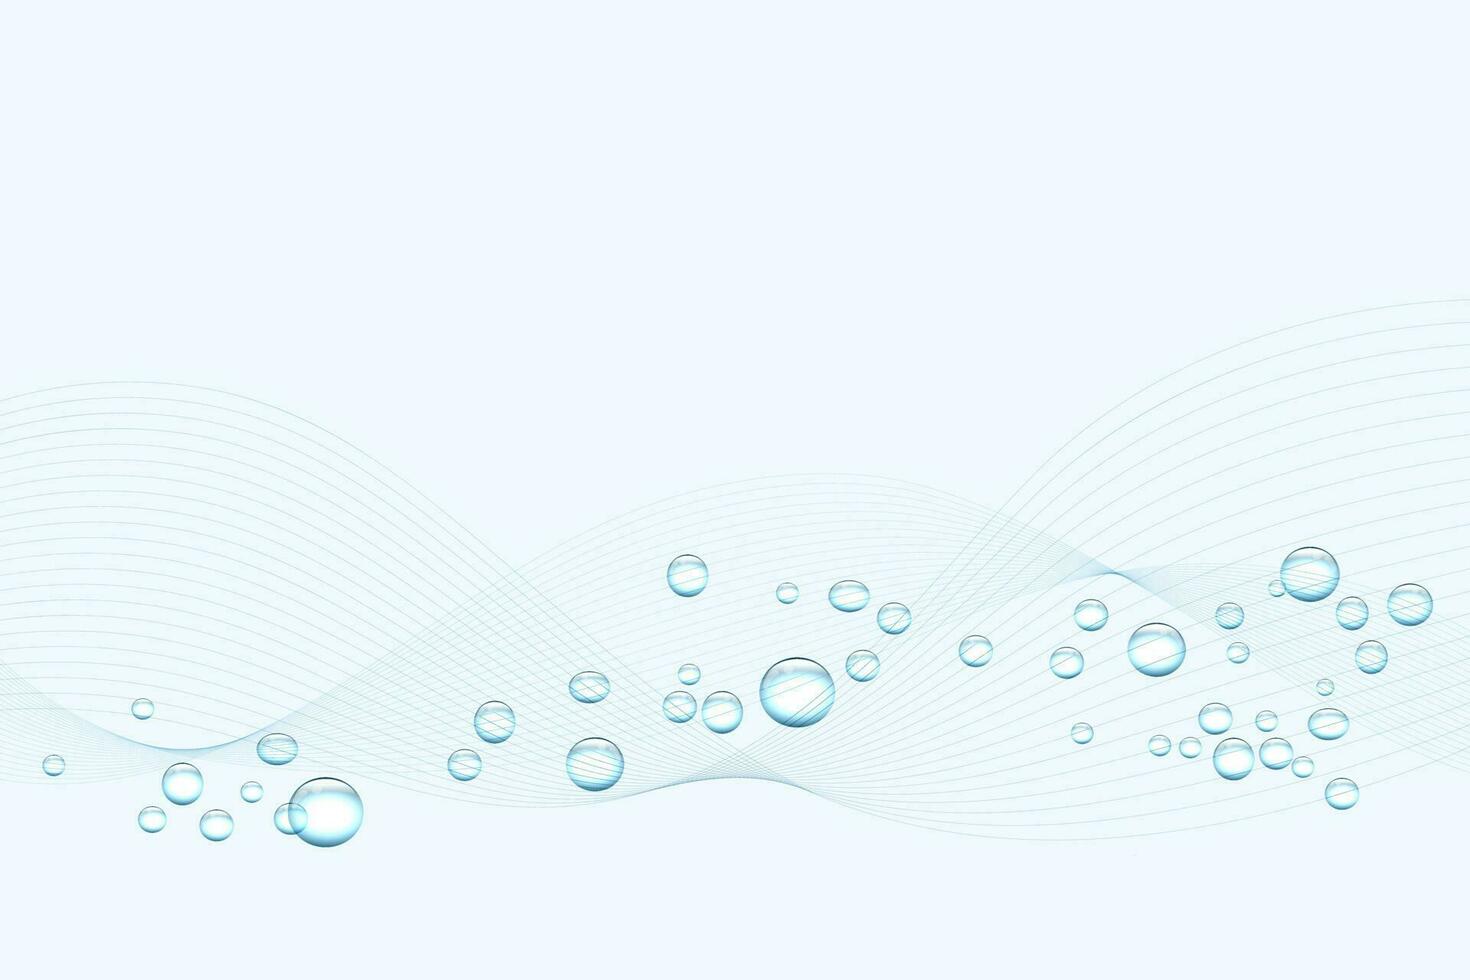 Abstract background of water, waves and bubbles on a white background. Geometric modern digital wallpaper. Vector illustration